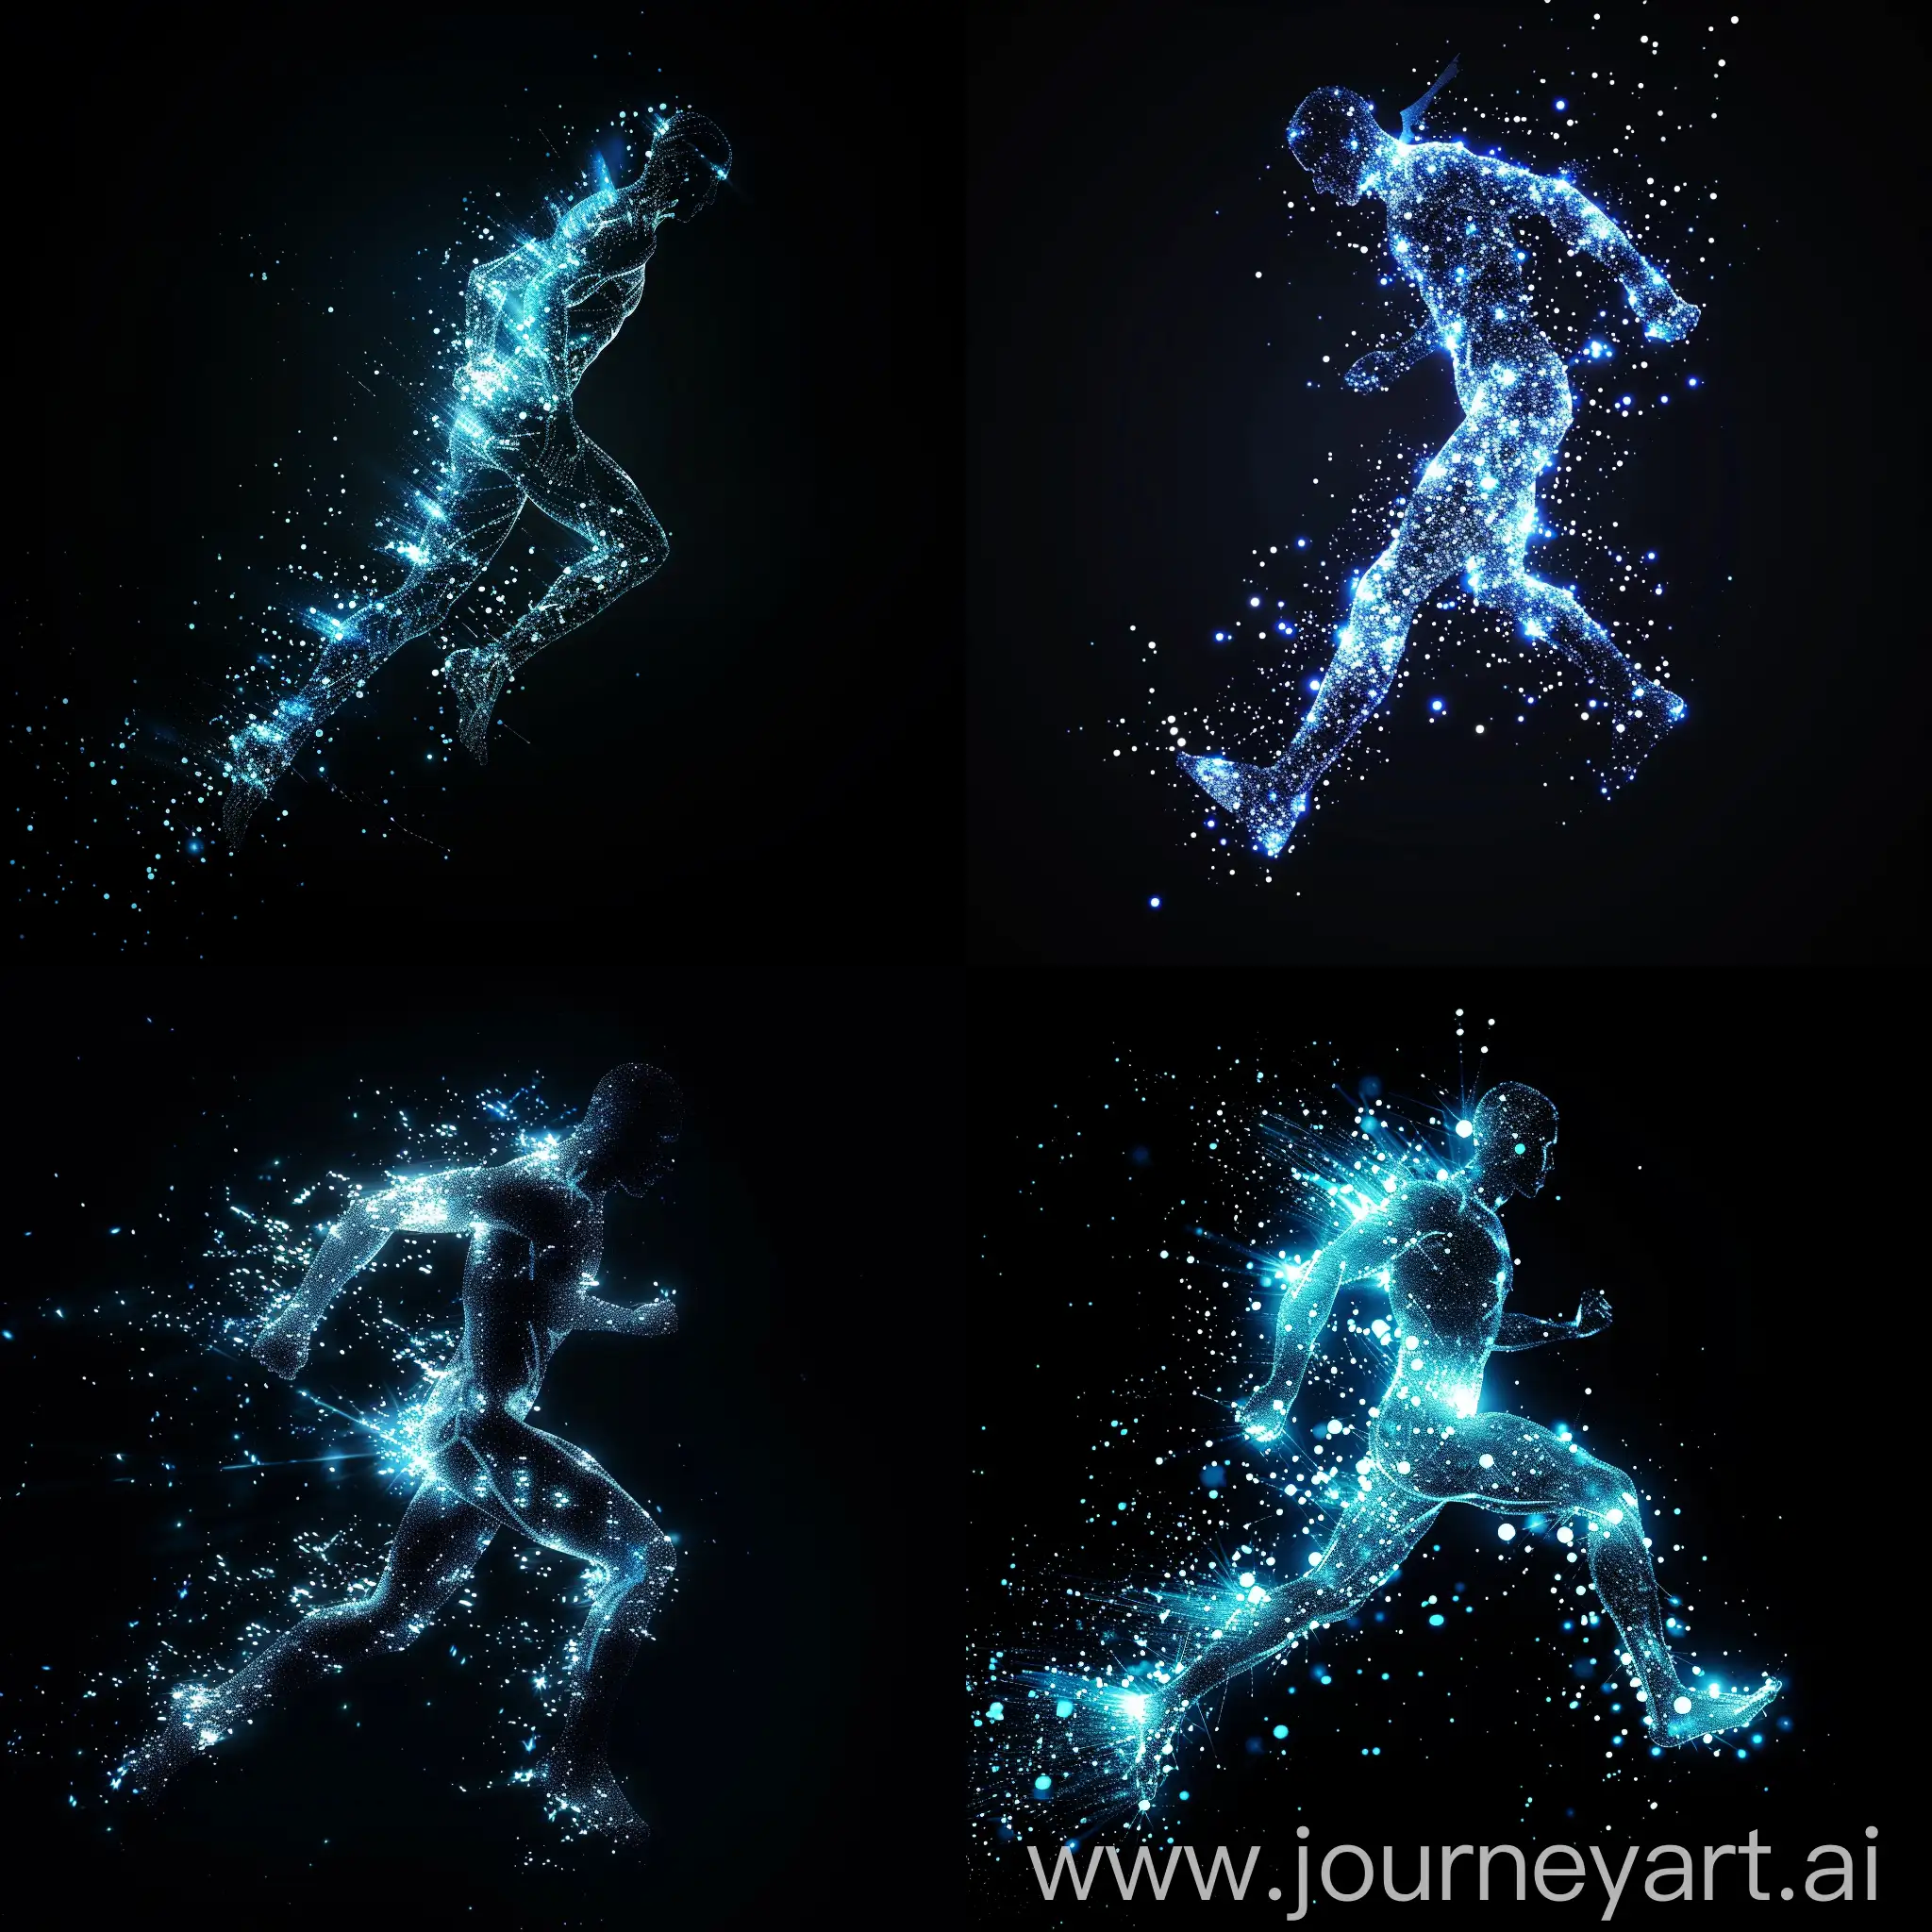 Craft a high-definition digital art image that captures a human silhouette in an act of leaping, composed of particles radiating a deep blue glow. The posture should emphasize strength and movement, as if sprinting through a stream of data. The profound black background should enhance the dynamic effect of the figure and light points